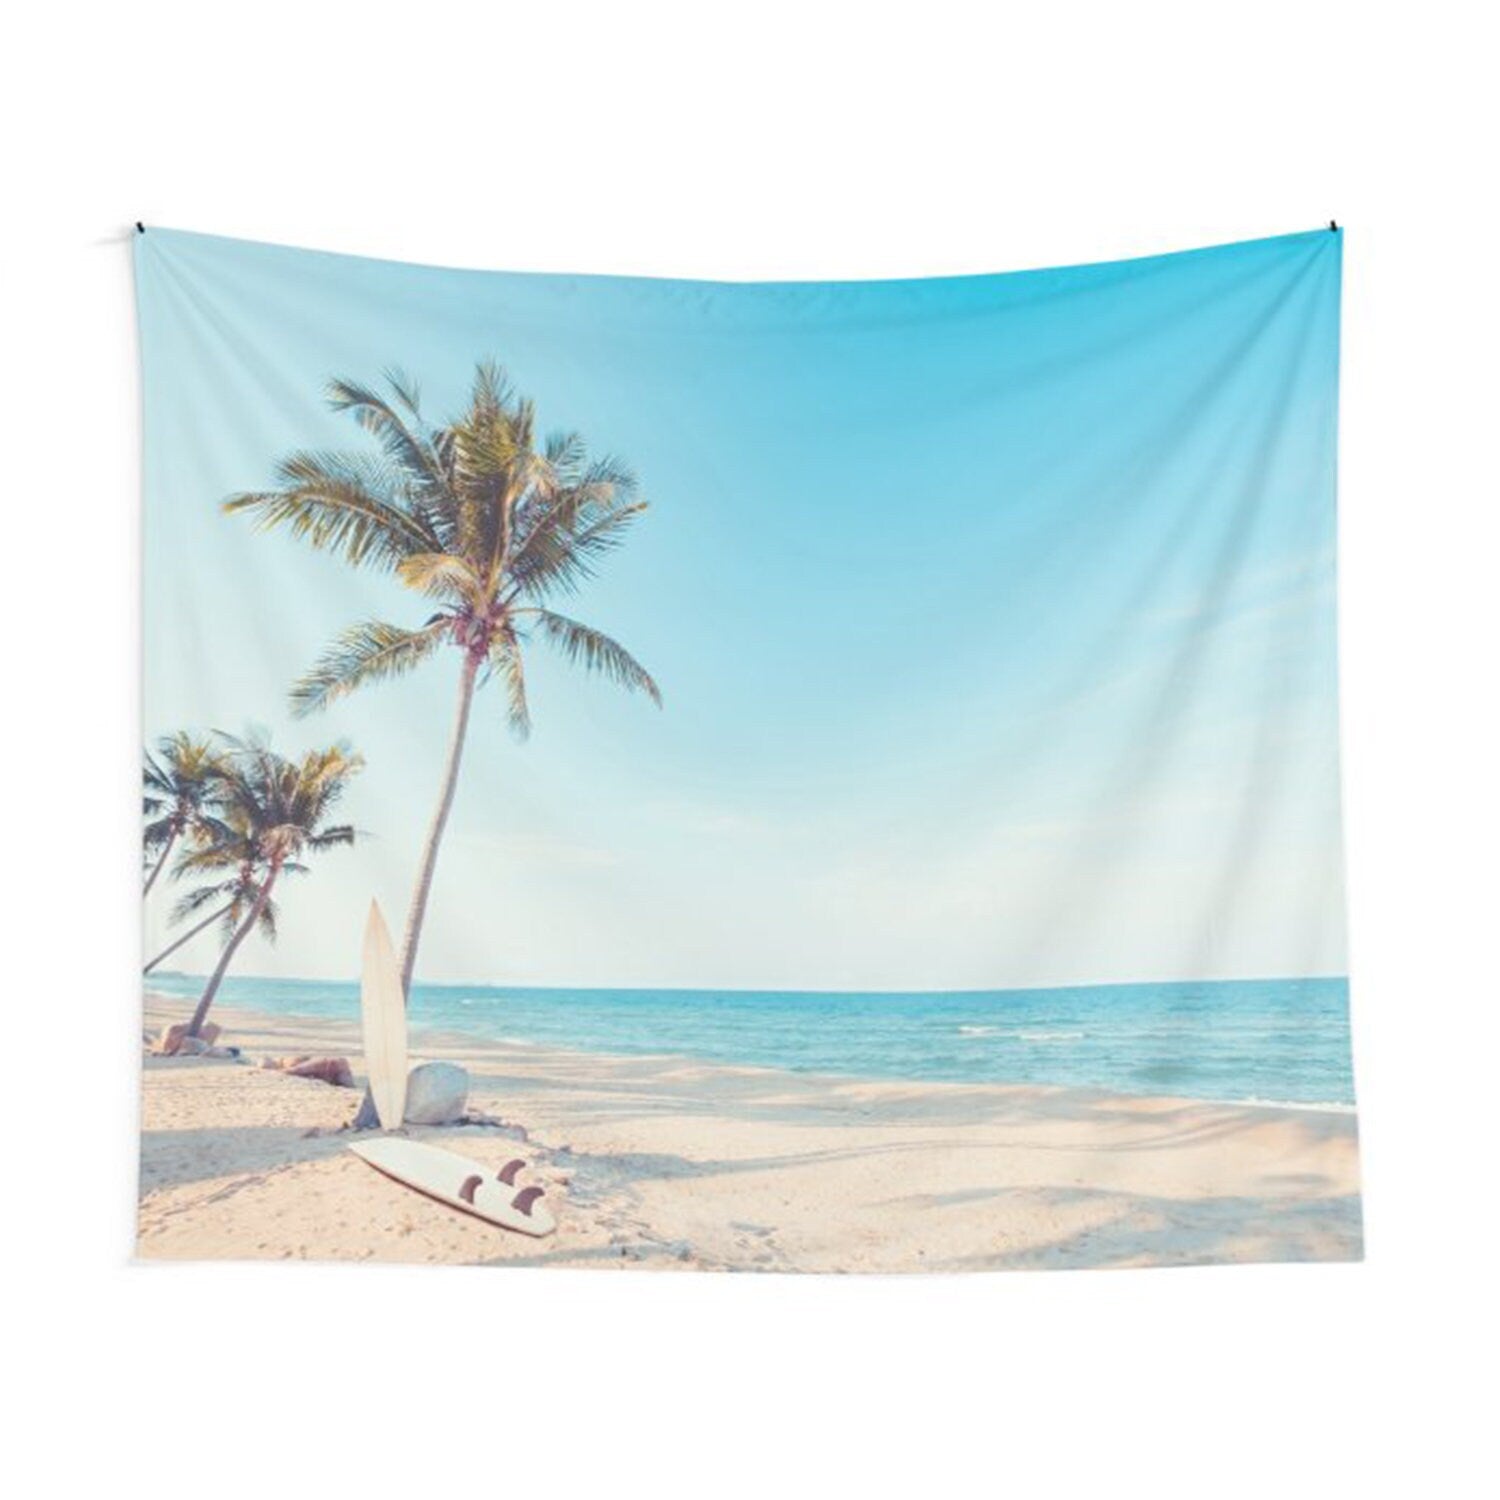 Surf Boards On The Beach Tapestry Beach Tapestry Surfer Tapestries Beachy Tapestries Beach Bum Tapestries Surfer Tapestries Surfer Art